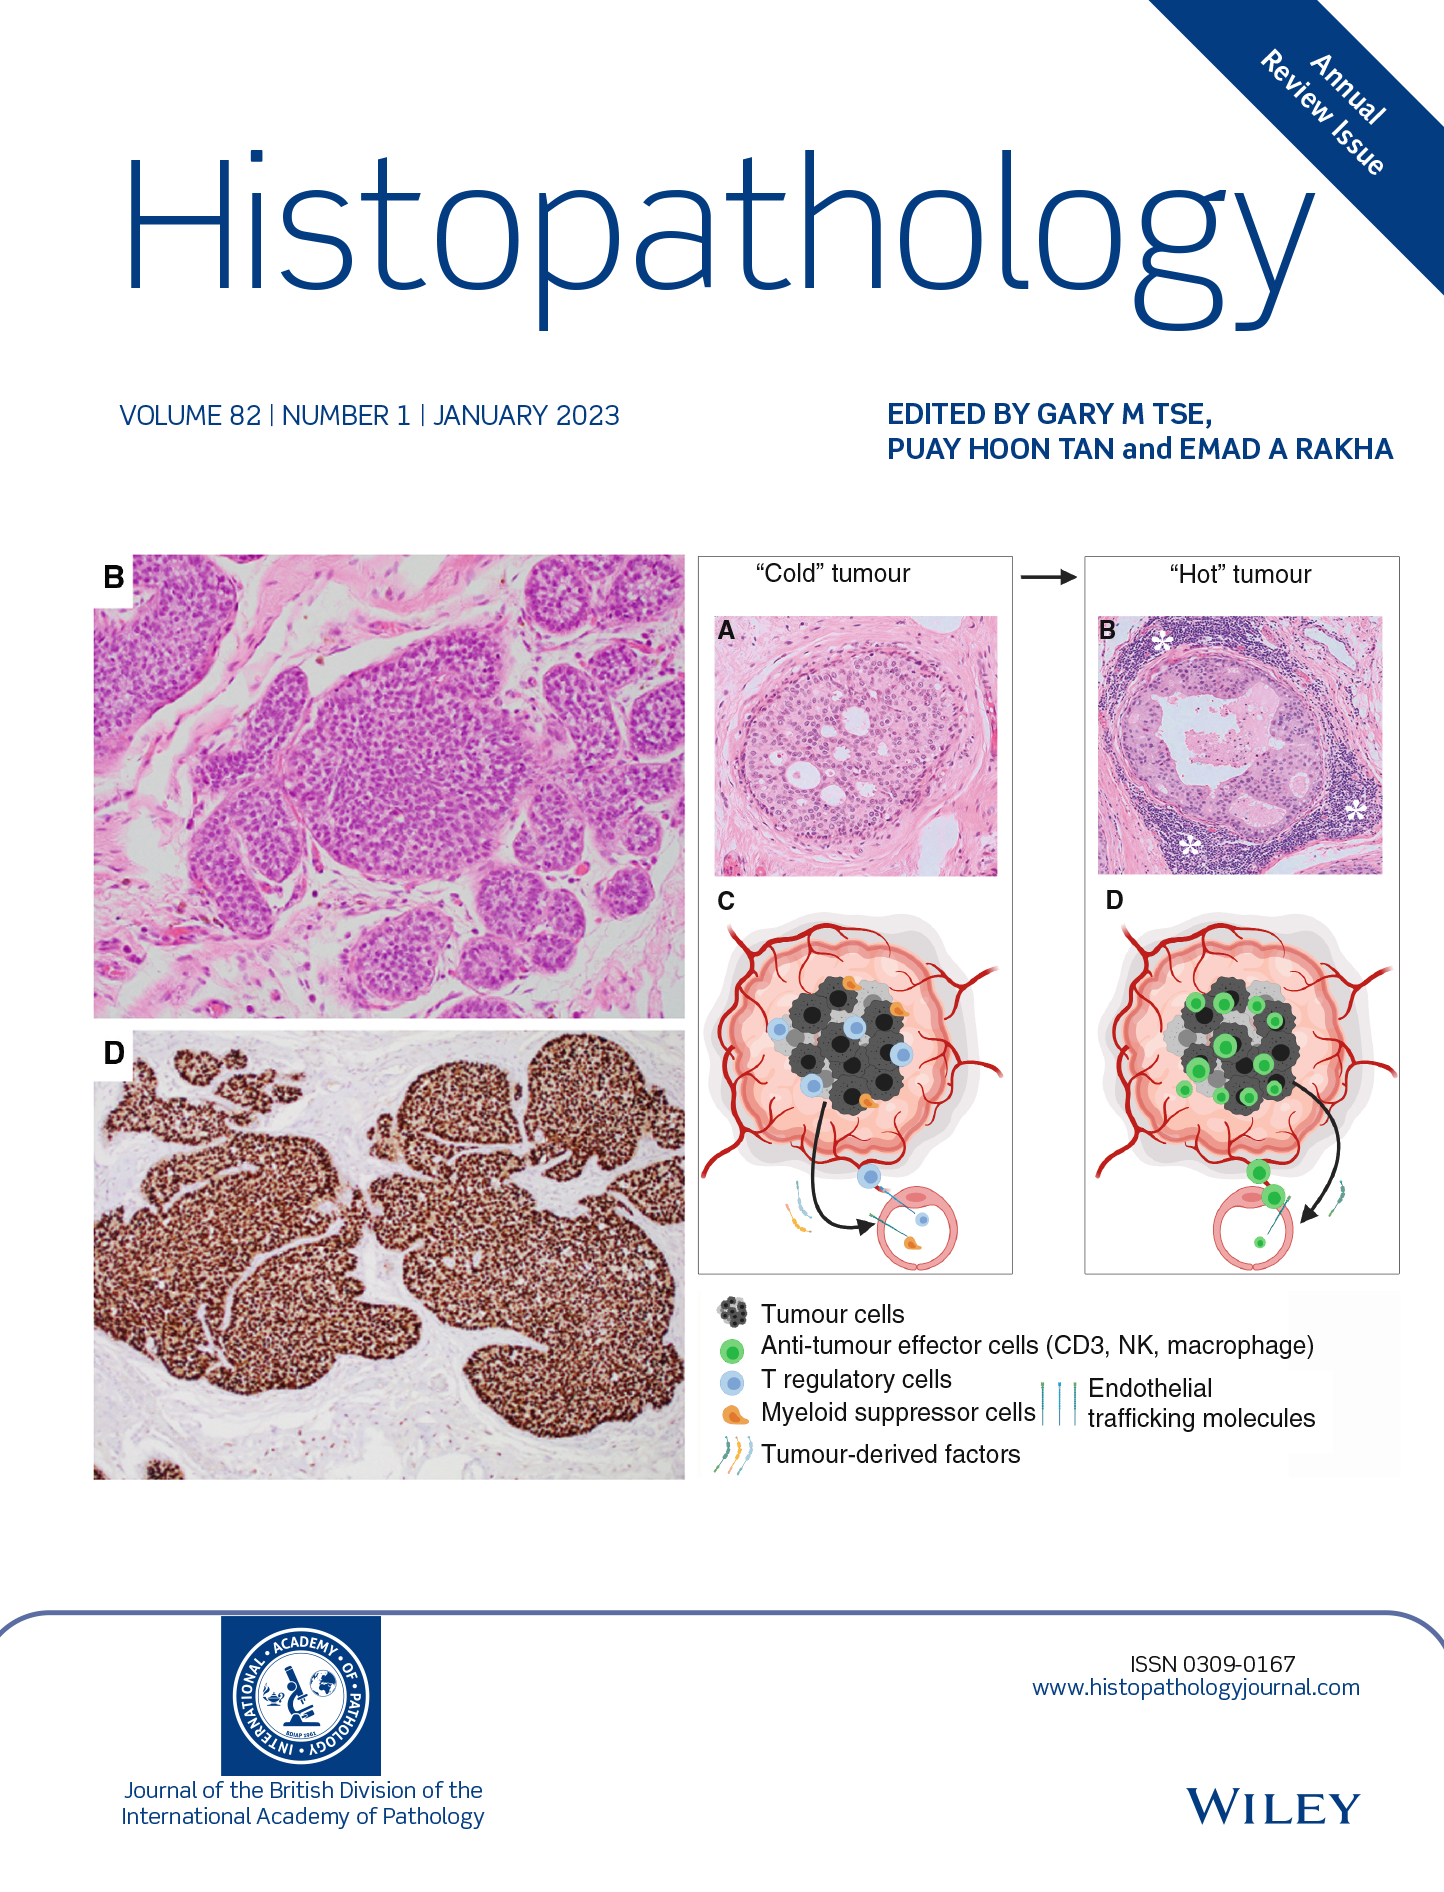 Histopathology Annual Review Issue Now Available image